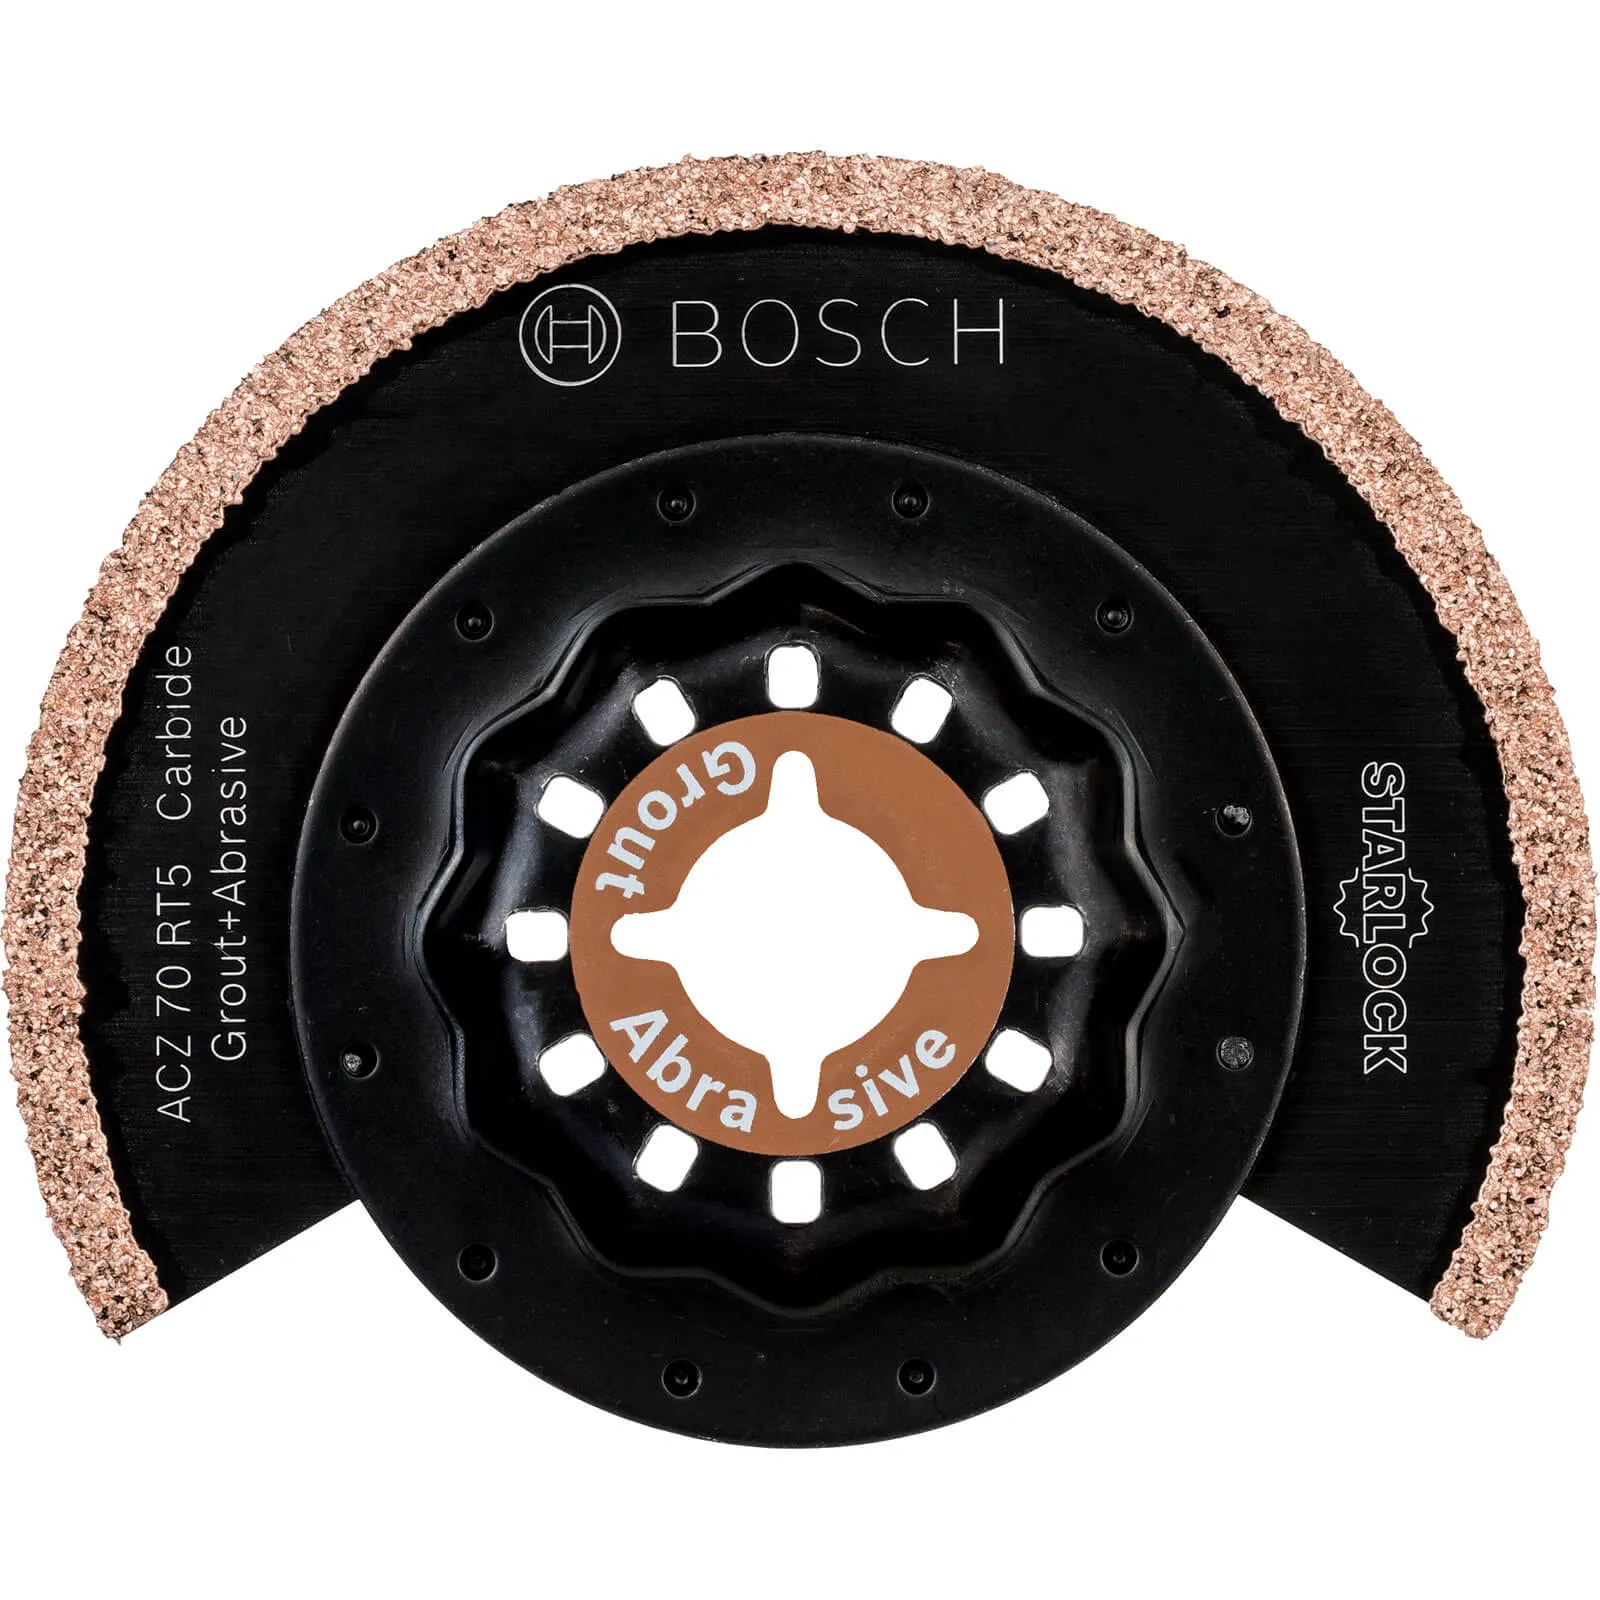 Bosch ACZ 70 RT5 Thin Grout Oscillating Multi Tool Segment Saw Blade - 70mm, Pack of 1